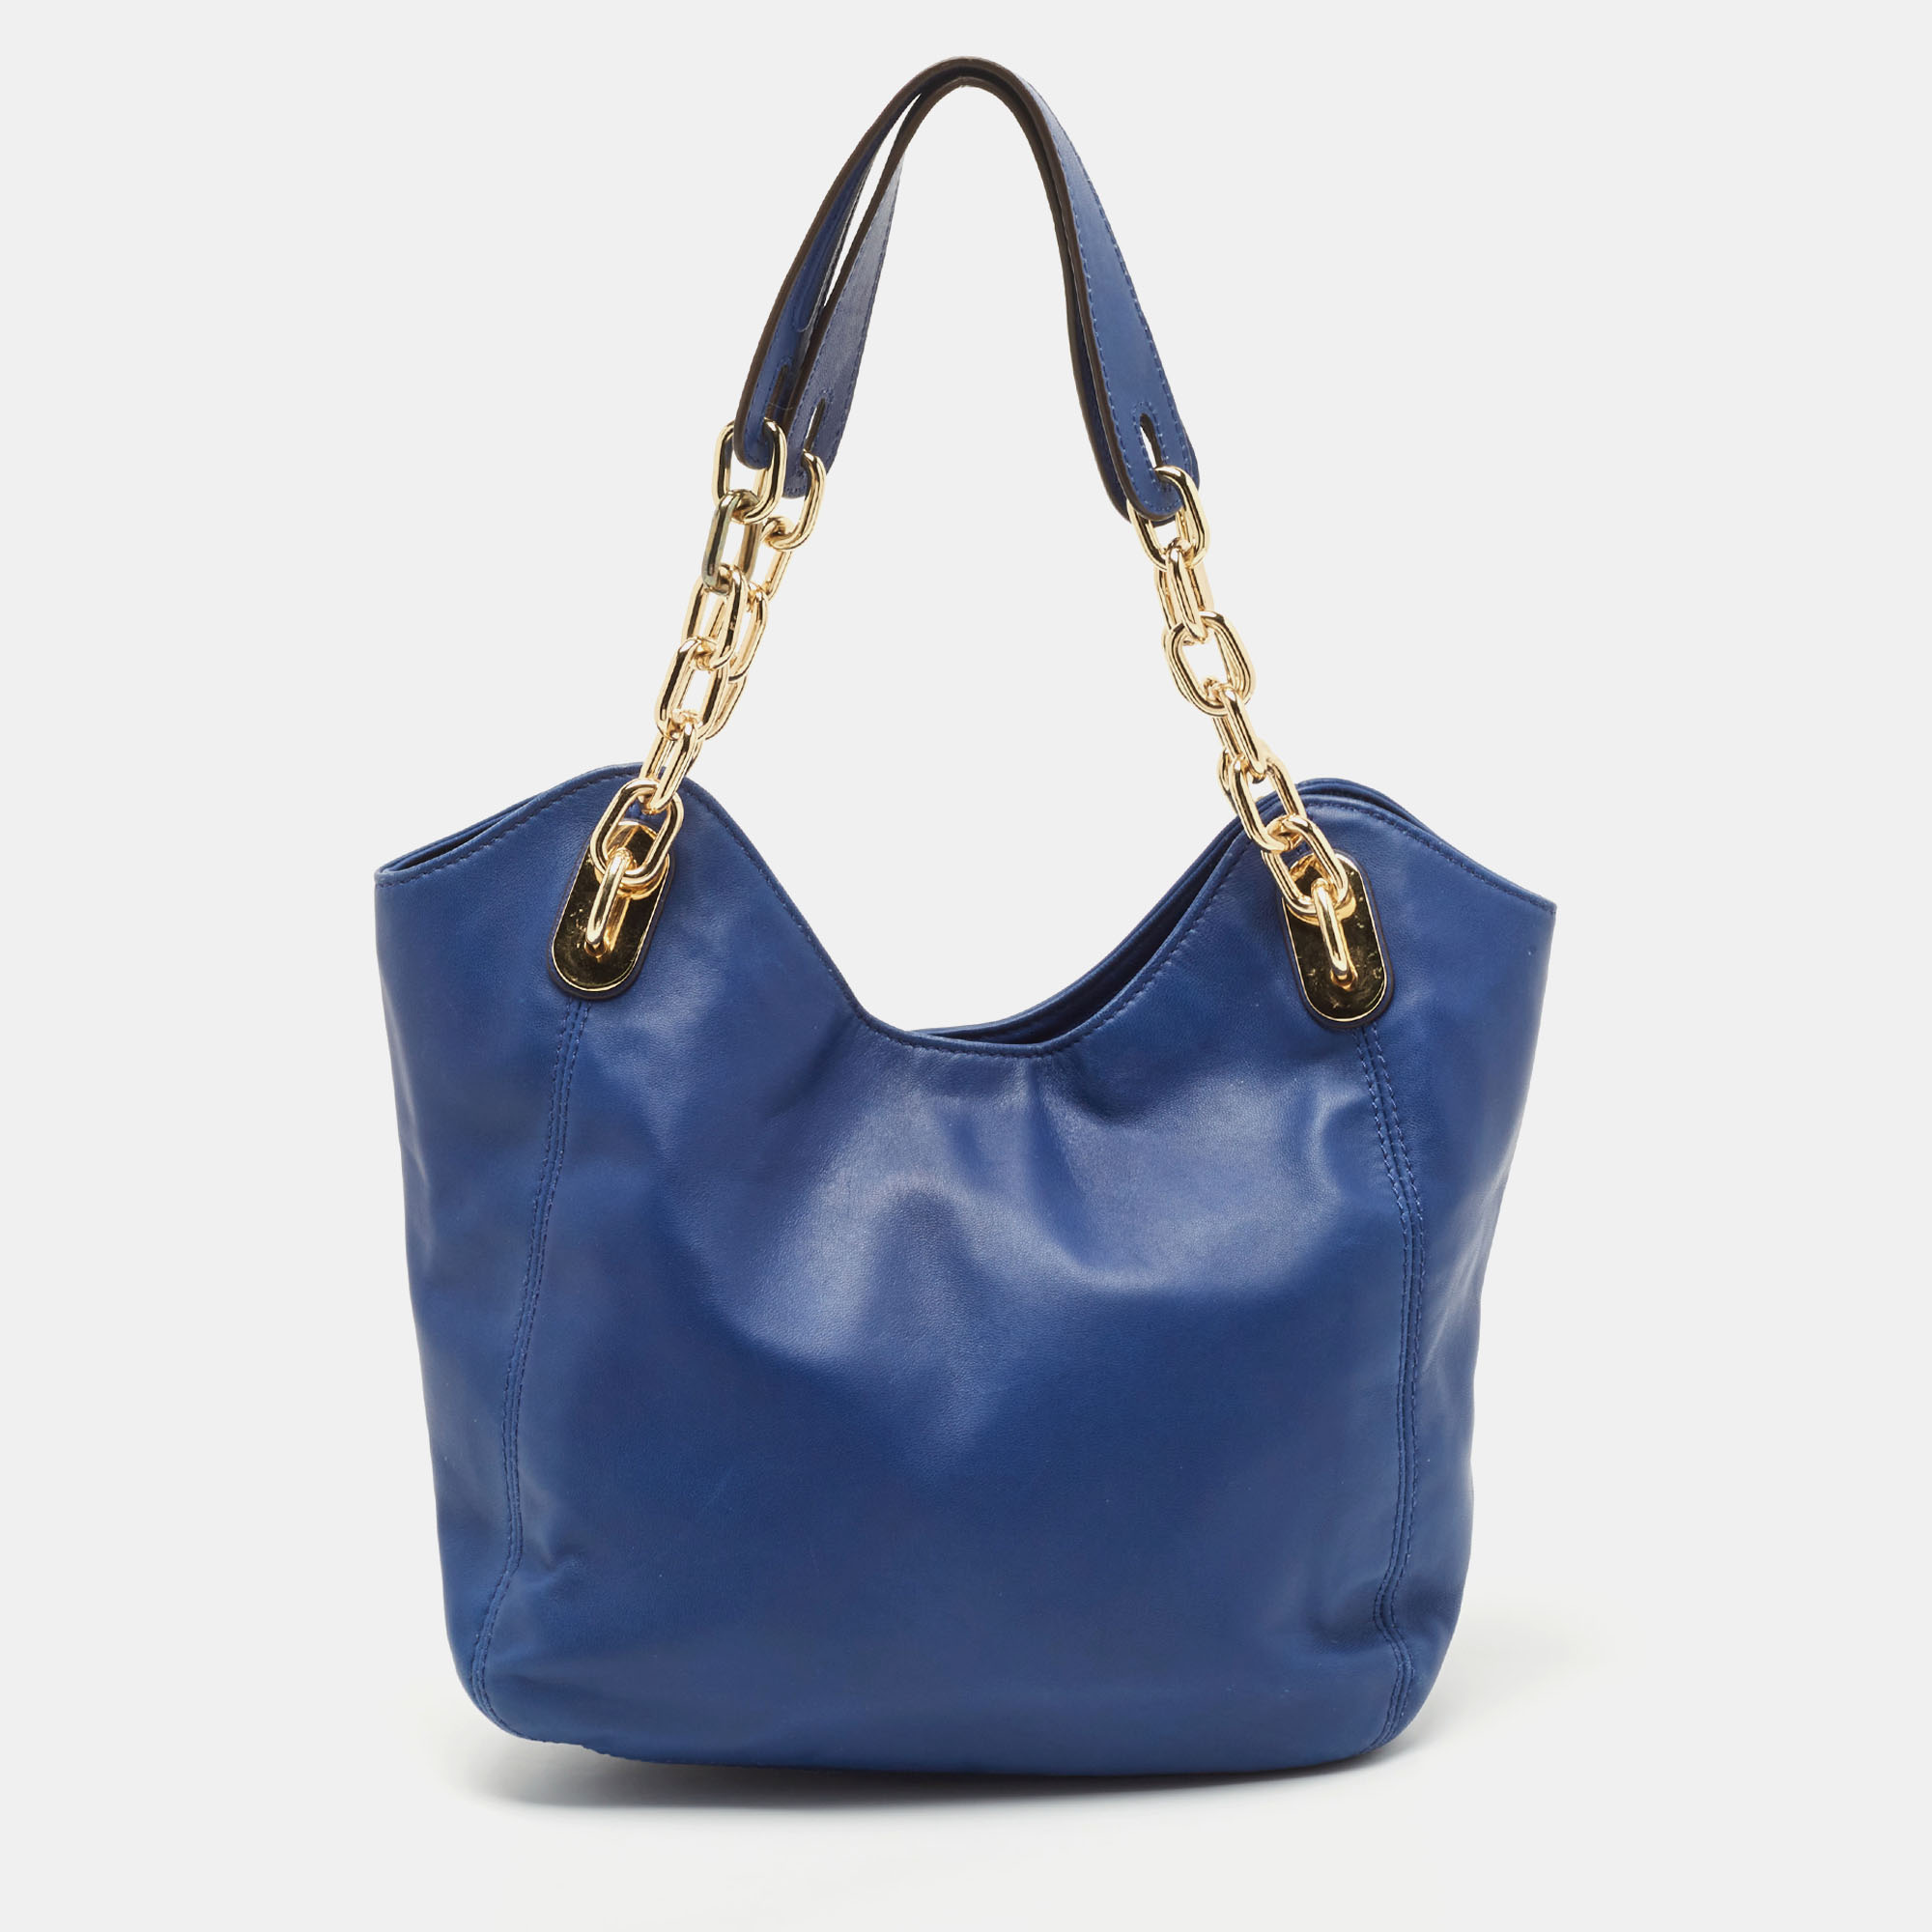 MICHAEL Michael Kors Blue Leather Lilly Tote